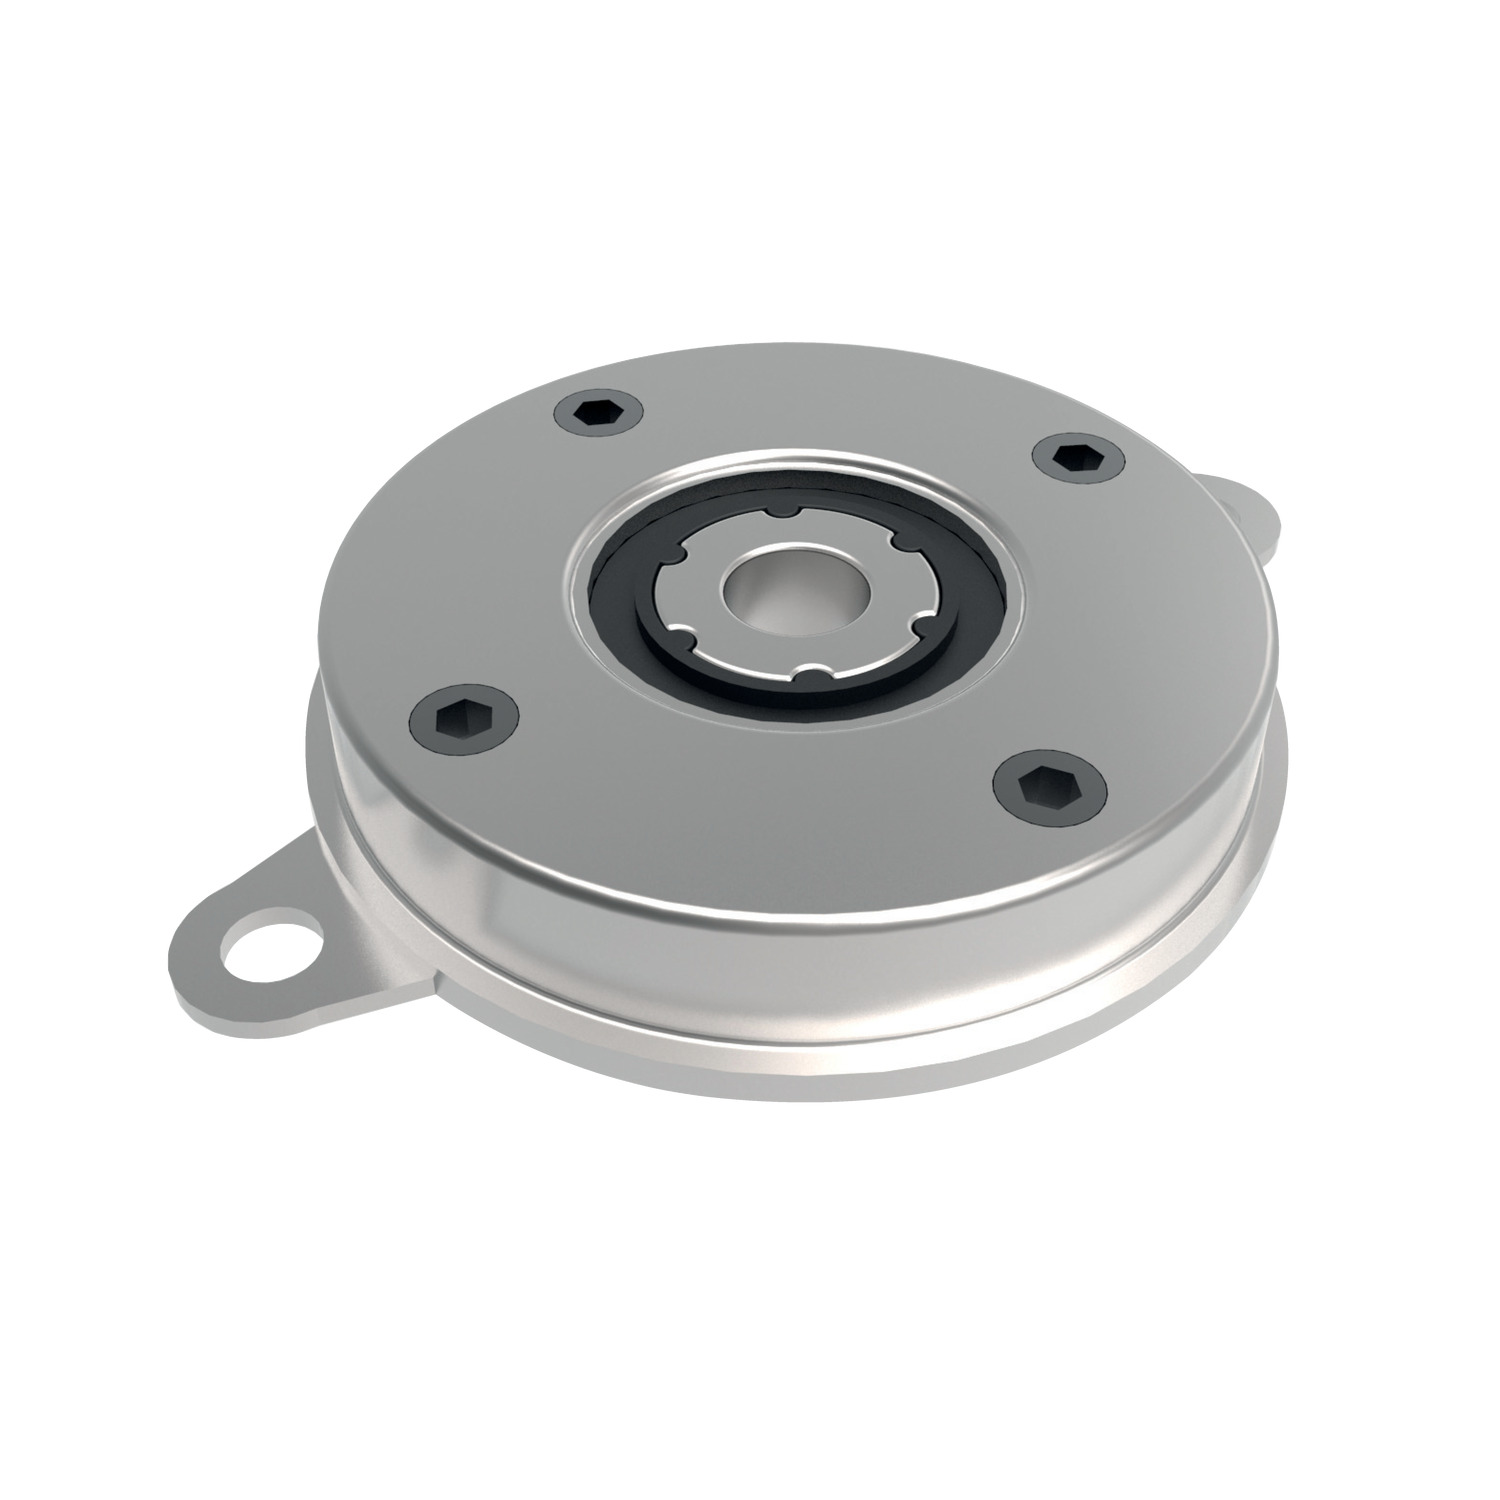 Product Q3240, Disk Dampers uni-directional - continuous direction - up to 55 Kgf.cm / 